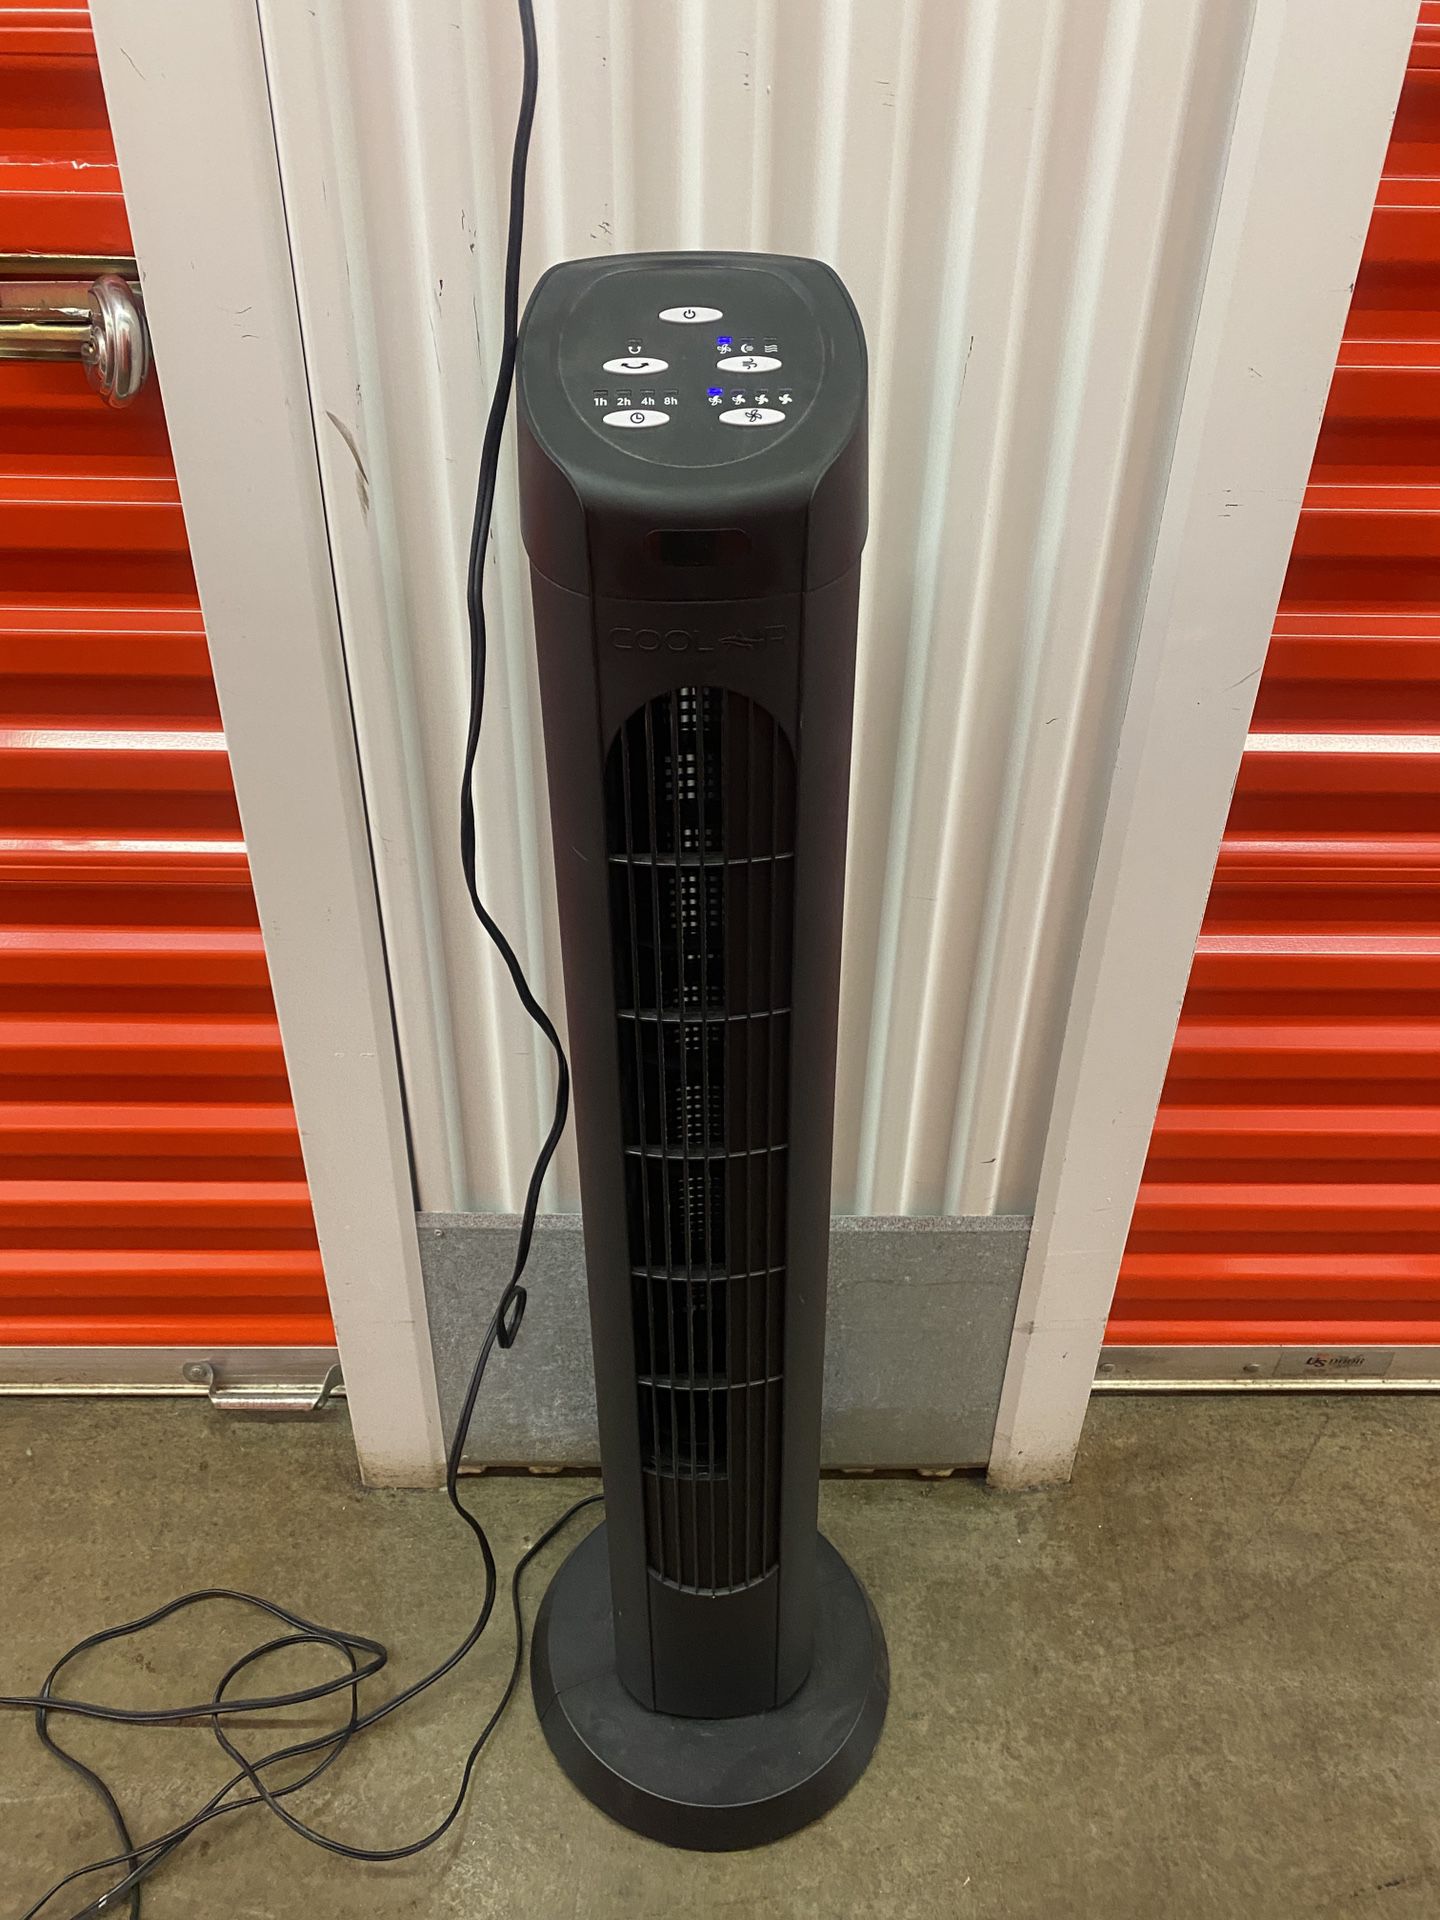 Cool Air Tower Fan With Remote For $35